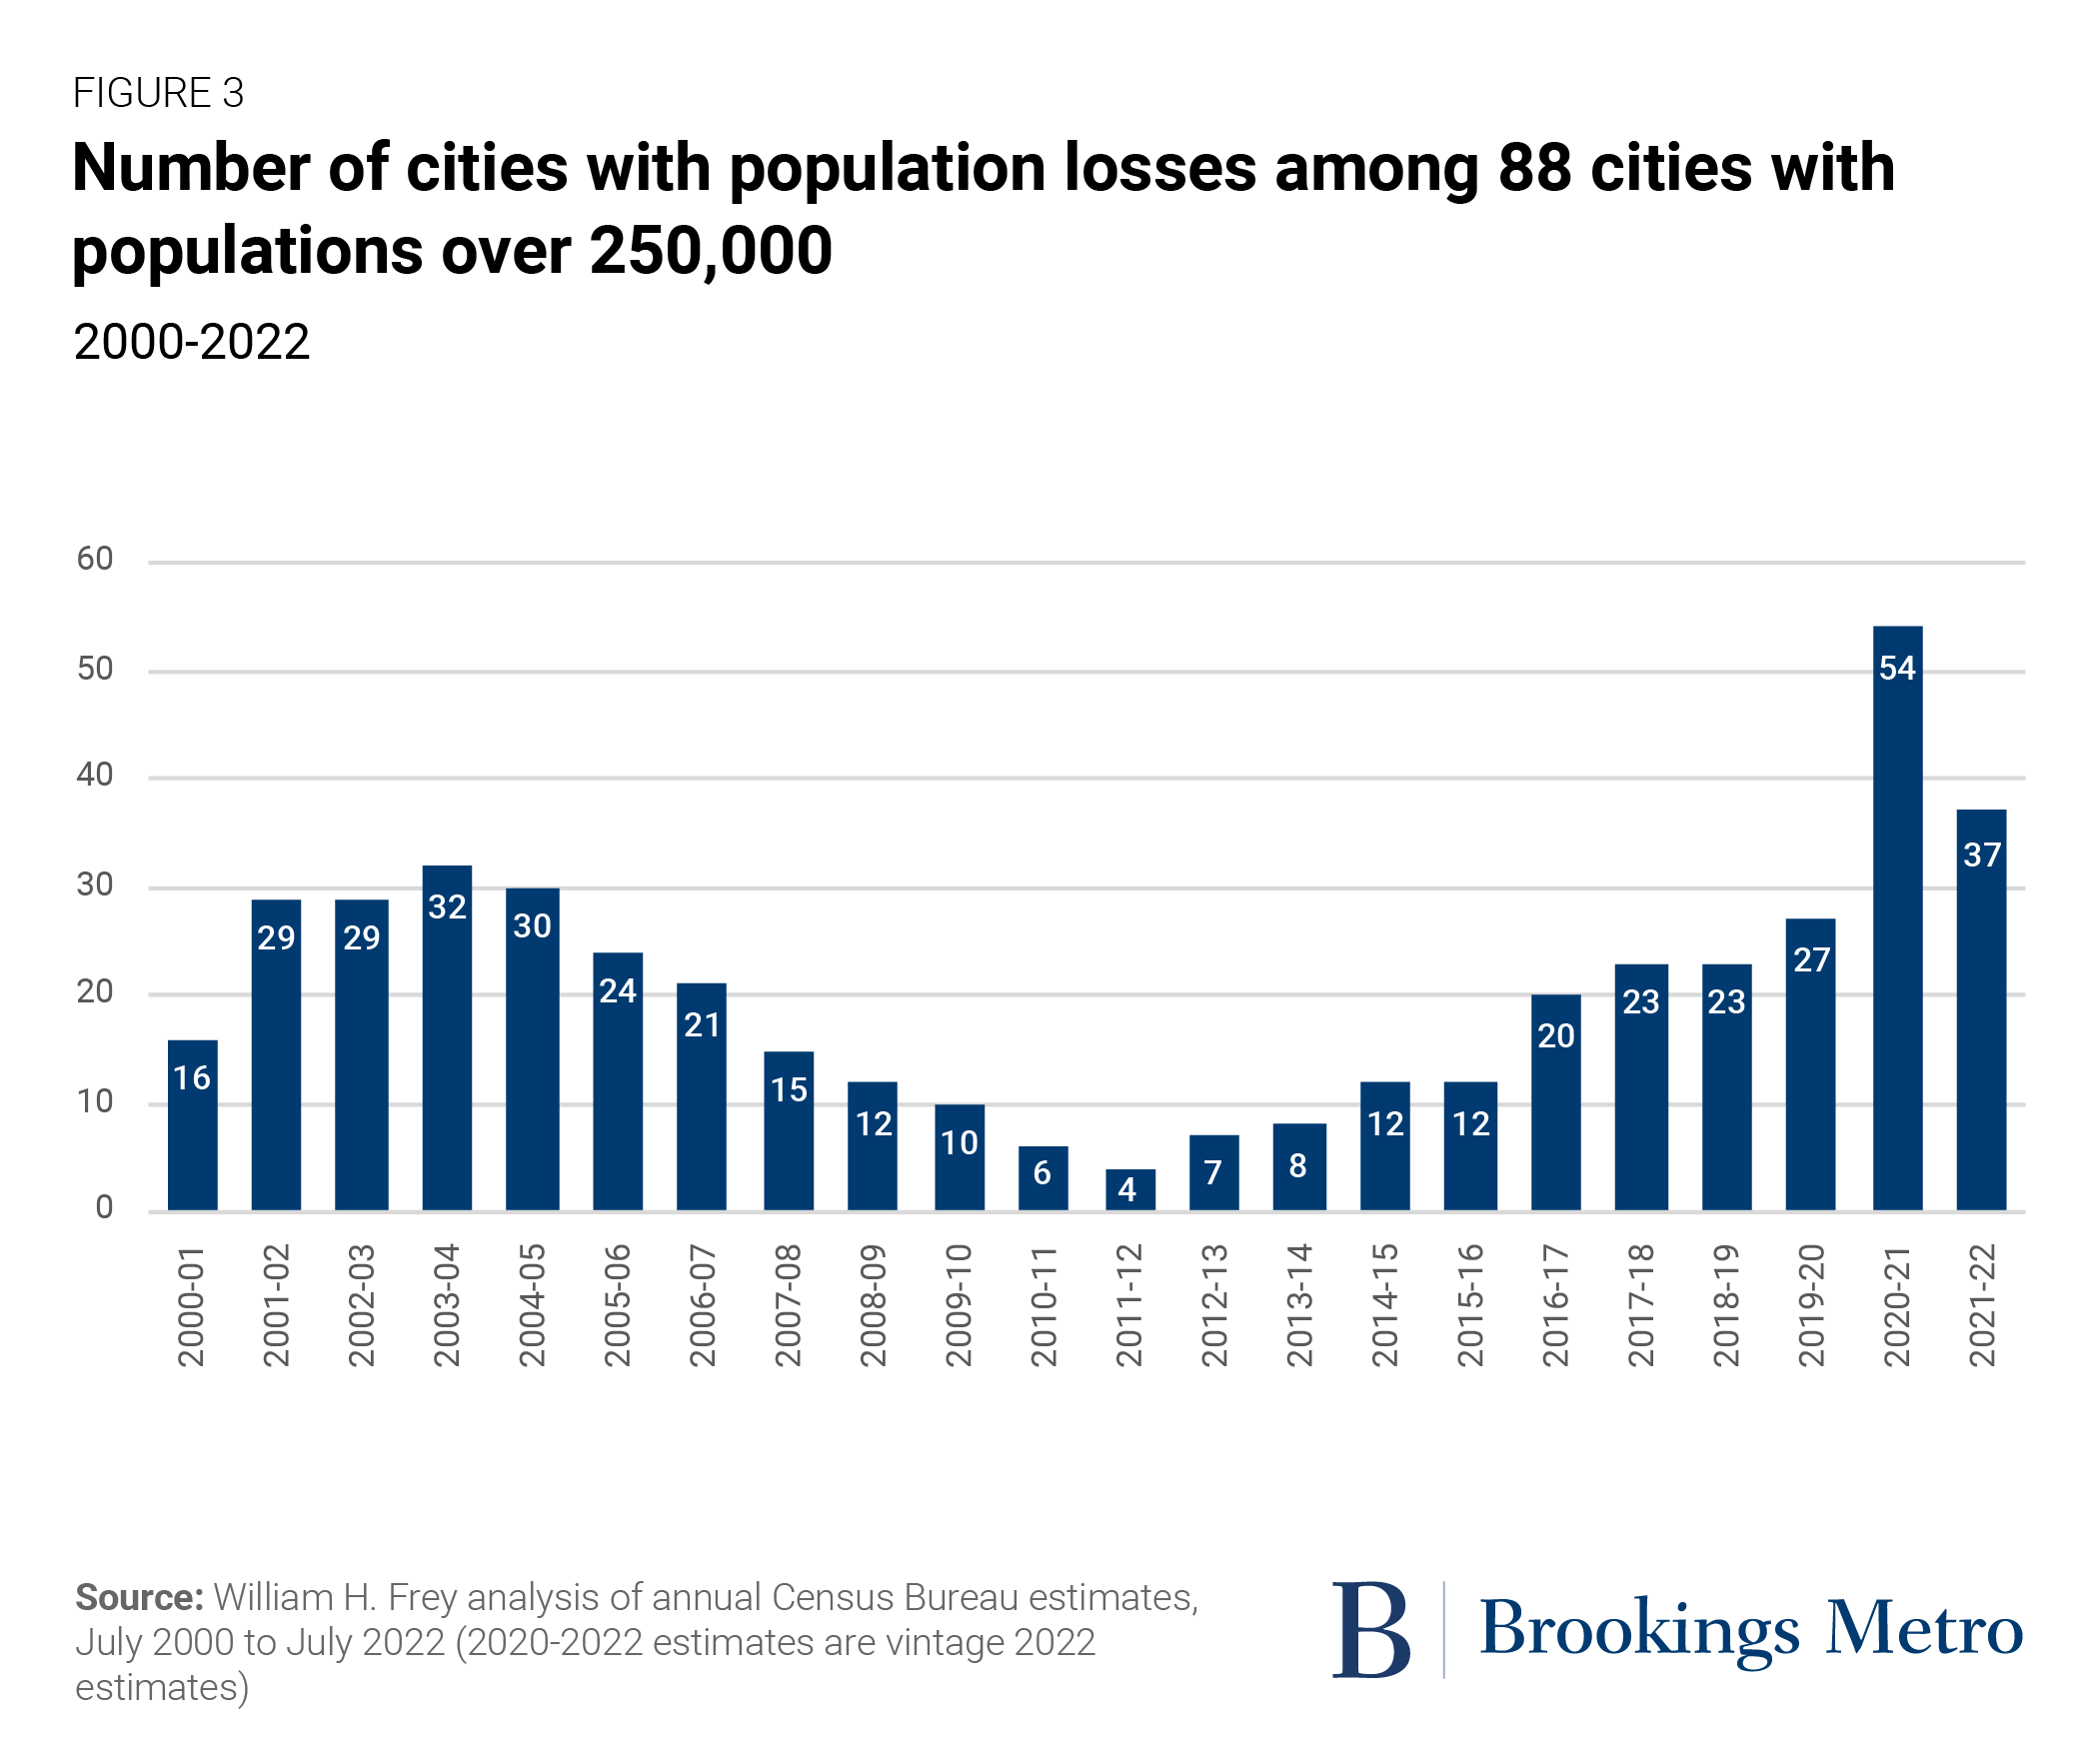 Big cities are showing signs of recovery after historic population